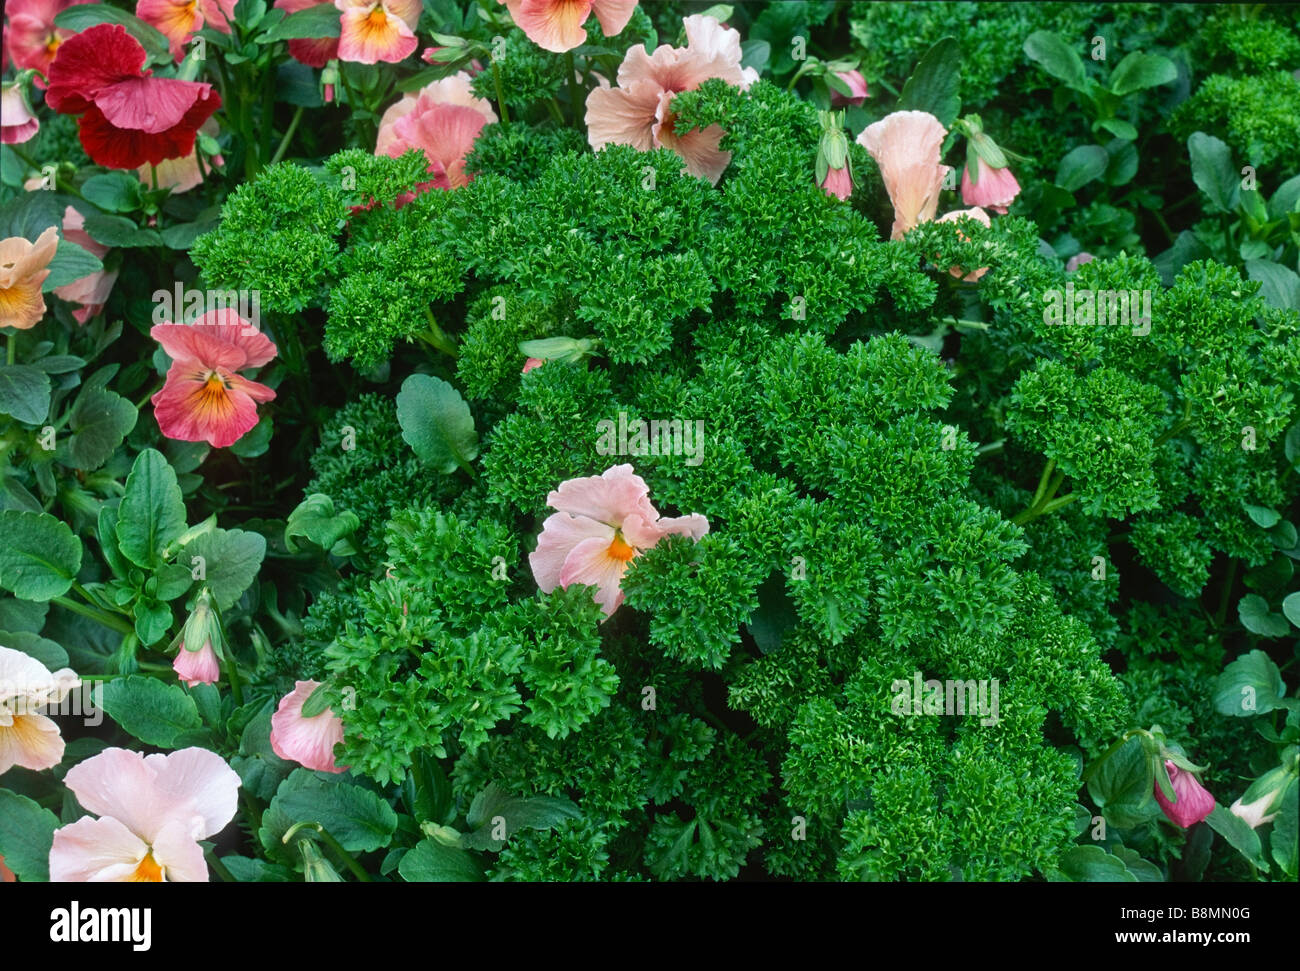 Curly parsley growing in a garden with pansies. Stock Photo